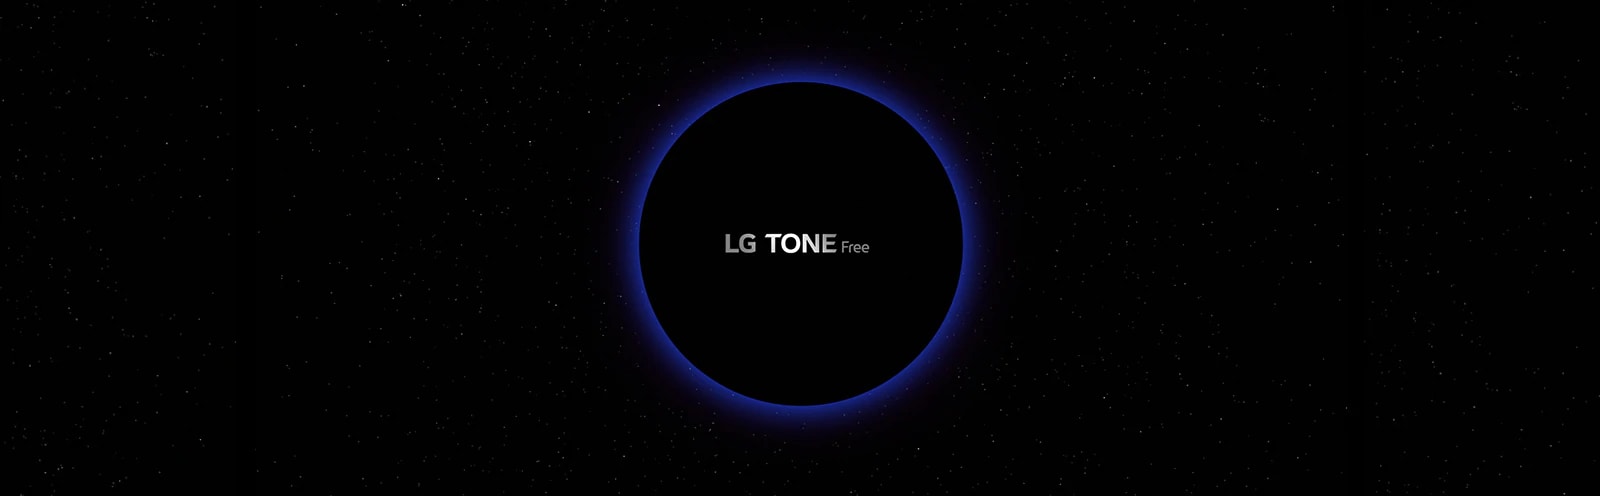 An image of a galaxy space and a blue-lighted circle in the middle of it with “LG TONE Free” lettering inside the circle